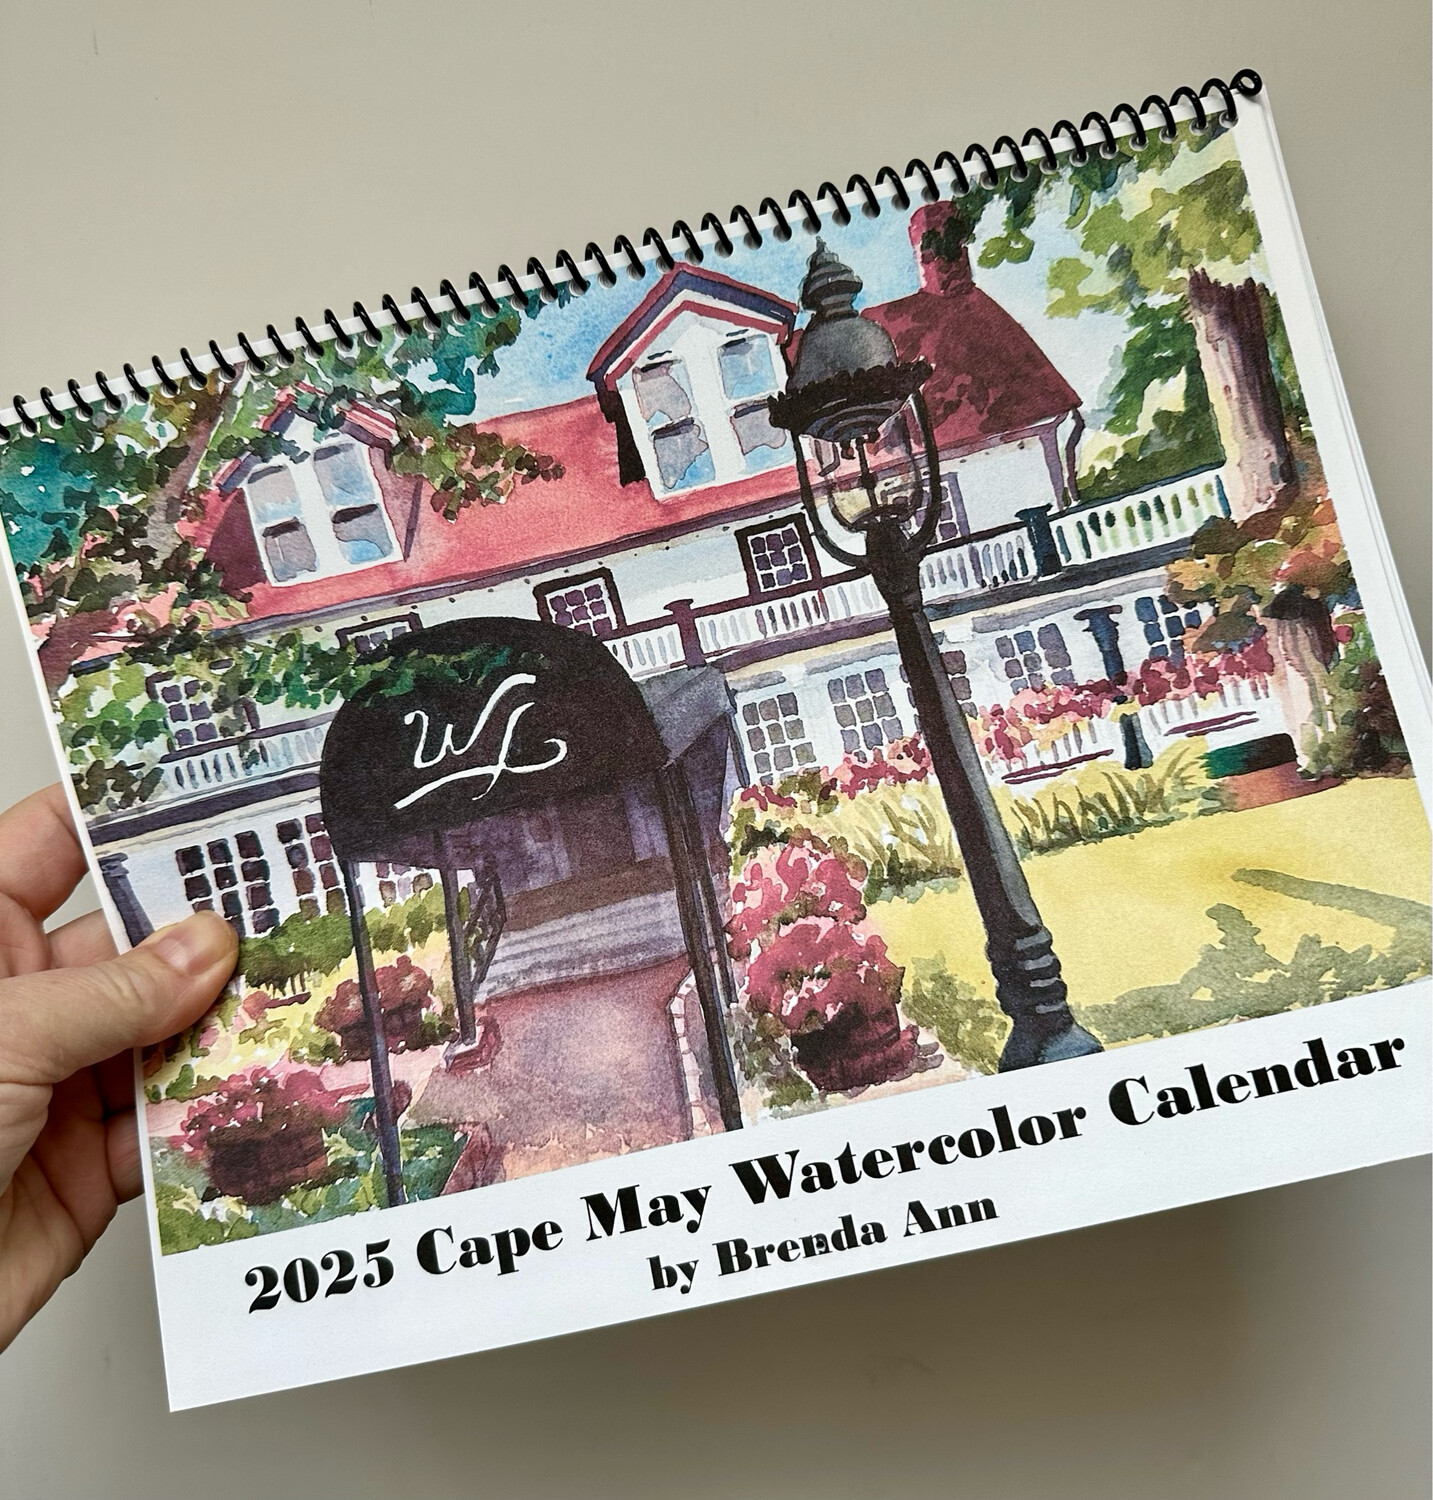 2025 Cape May Watercolor Wall Calendar - Art for Your Home or Office for Your Vacation Escape